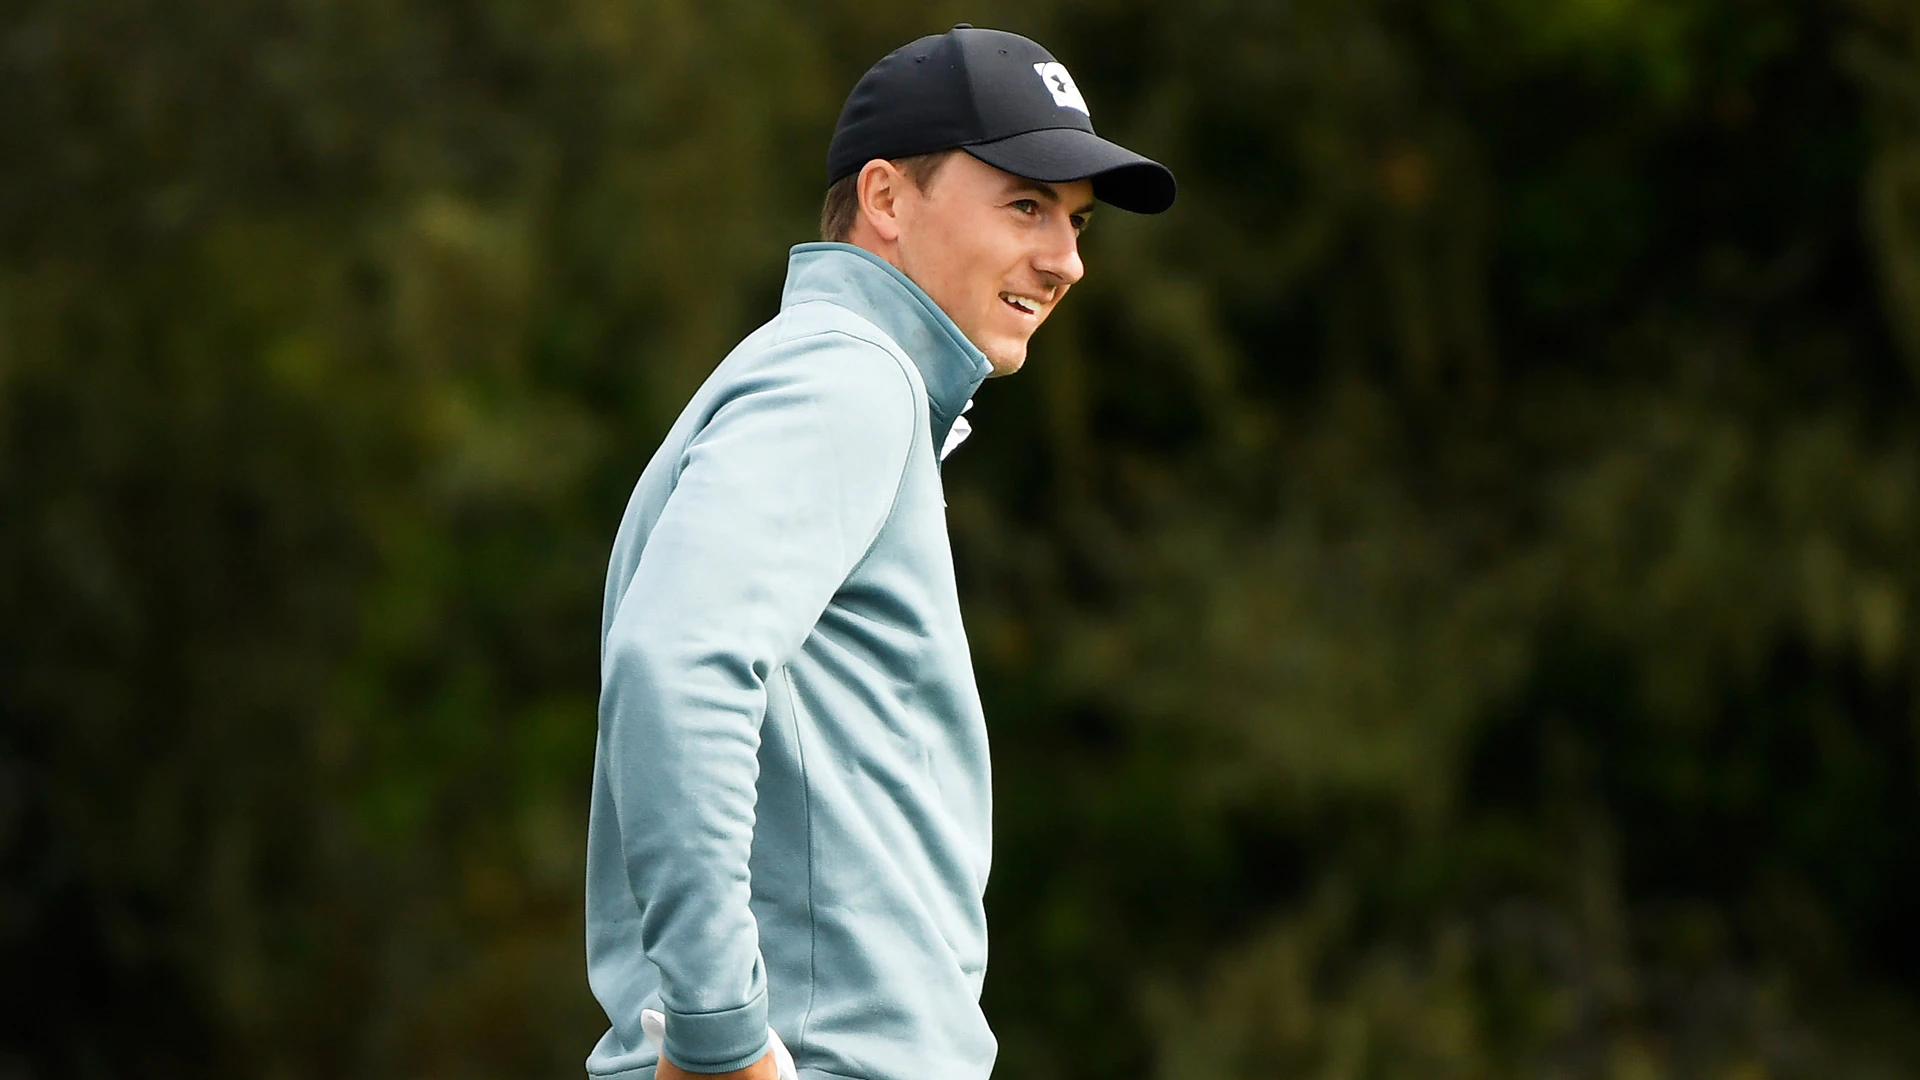 His stomach still not 100%, Jordan Spieth hopes Pebble can be final remedy 4